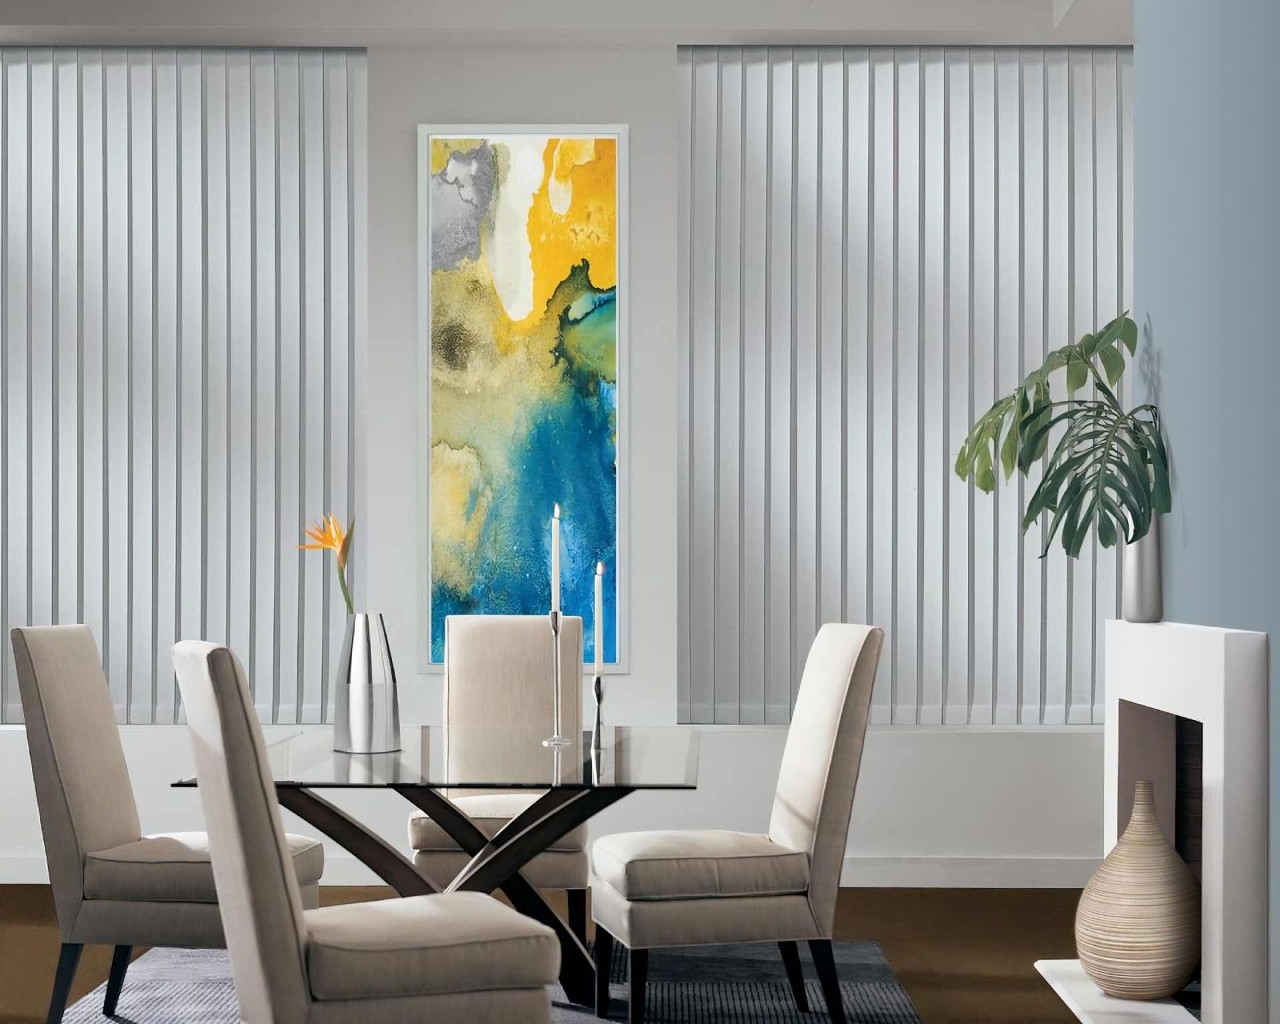 Somner® Custom Vertical Blinds near Wichita, Wichita (KS) with various materials, colors, and more